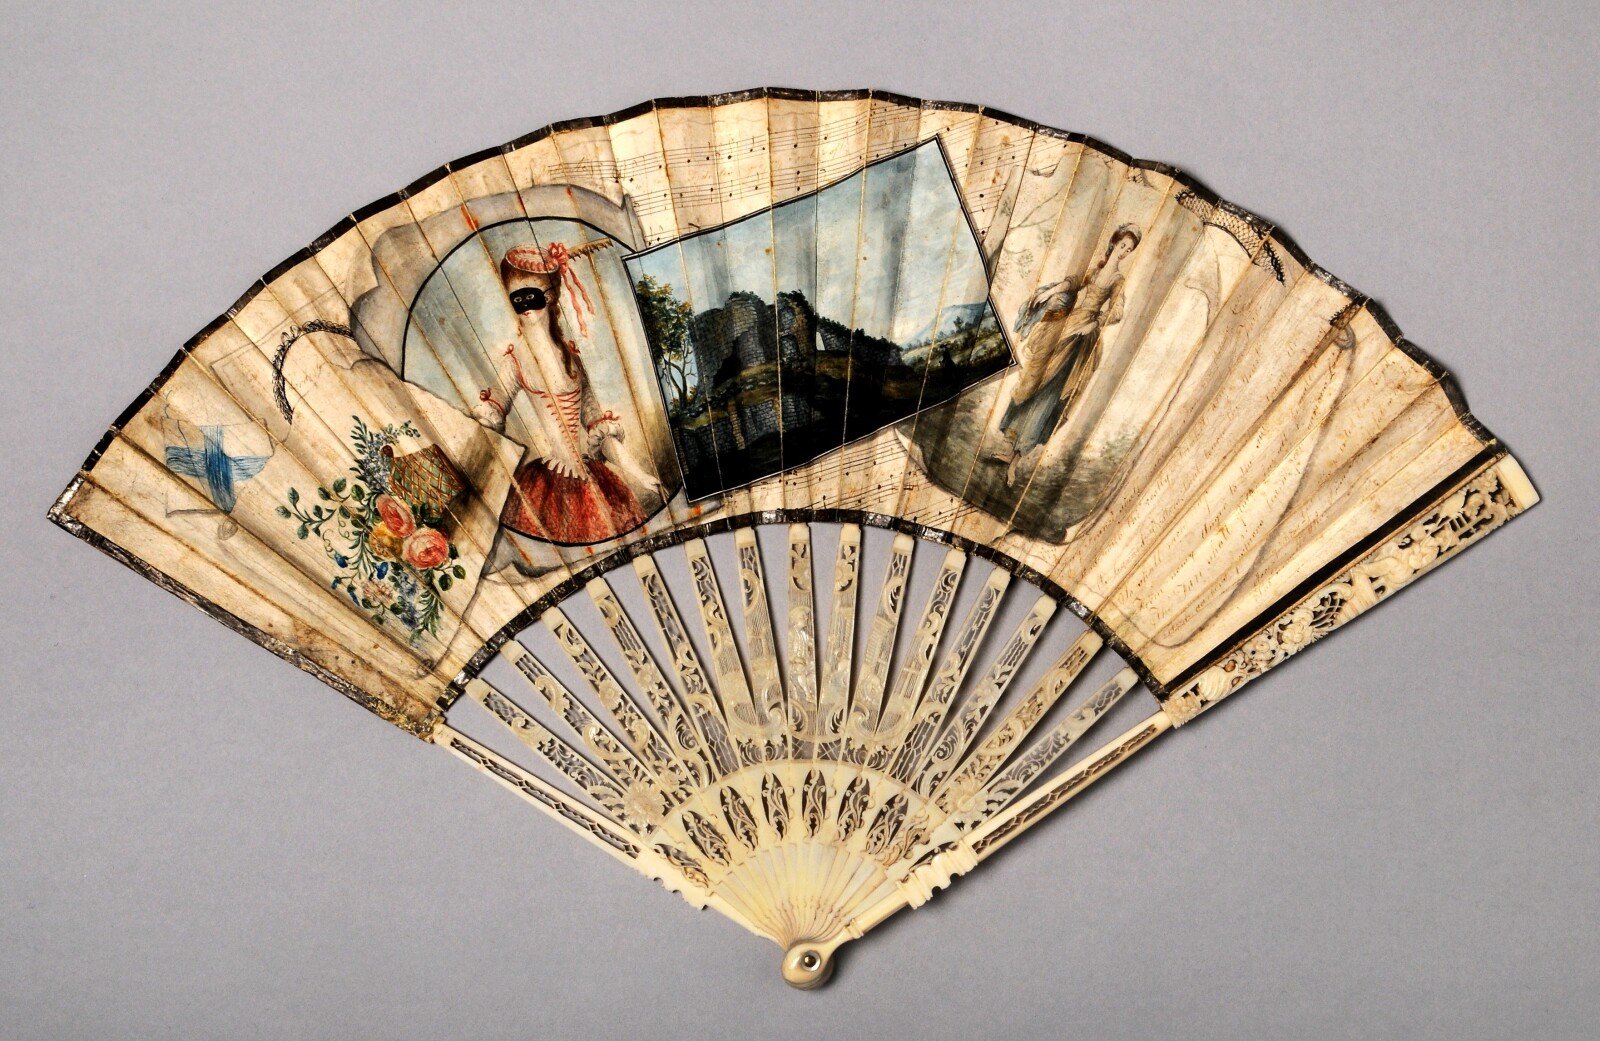 Fan with painted illustration of a masked woman.